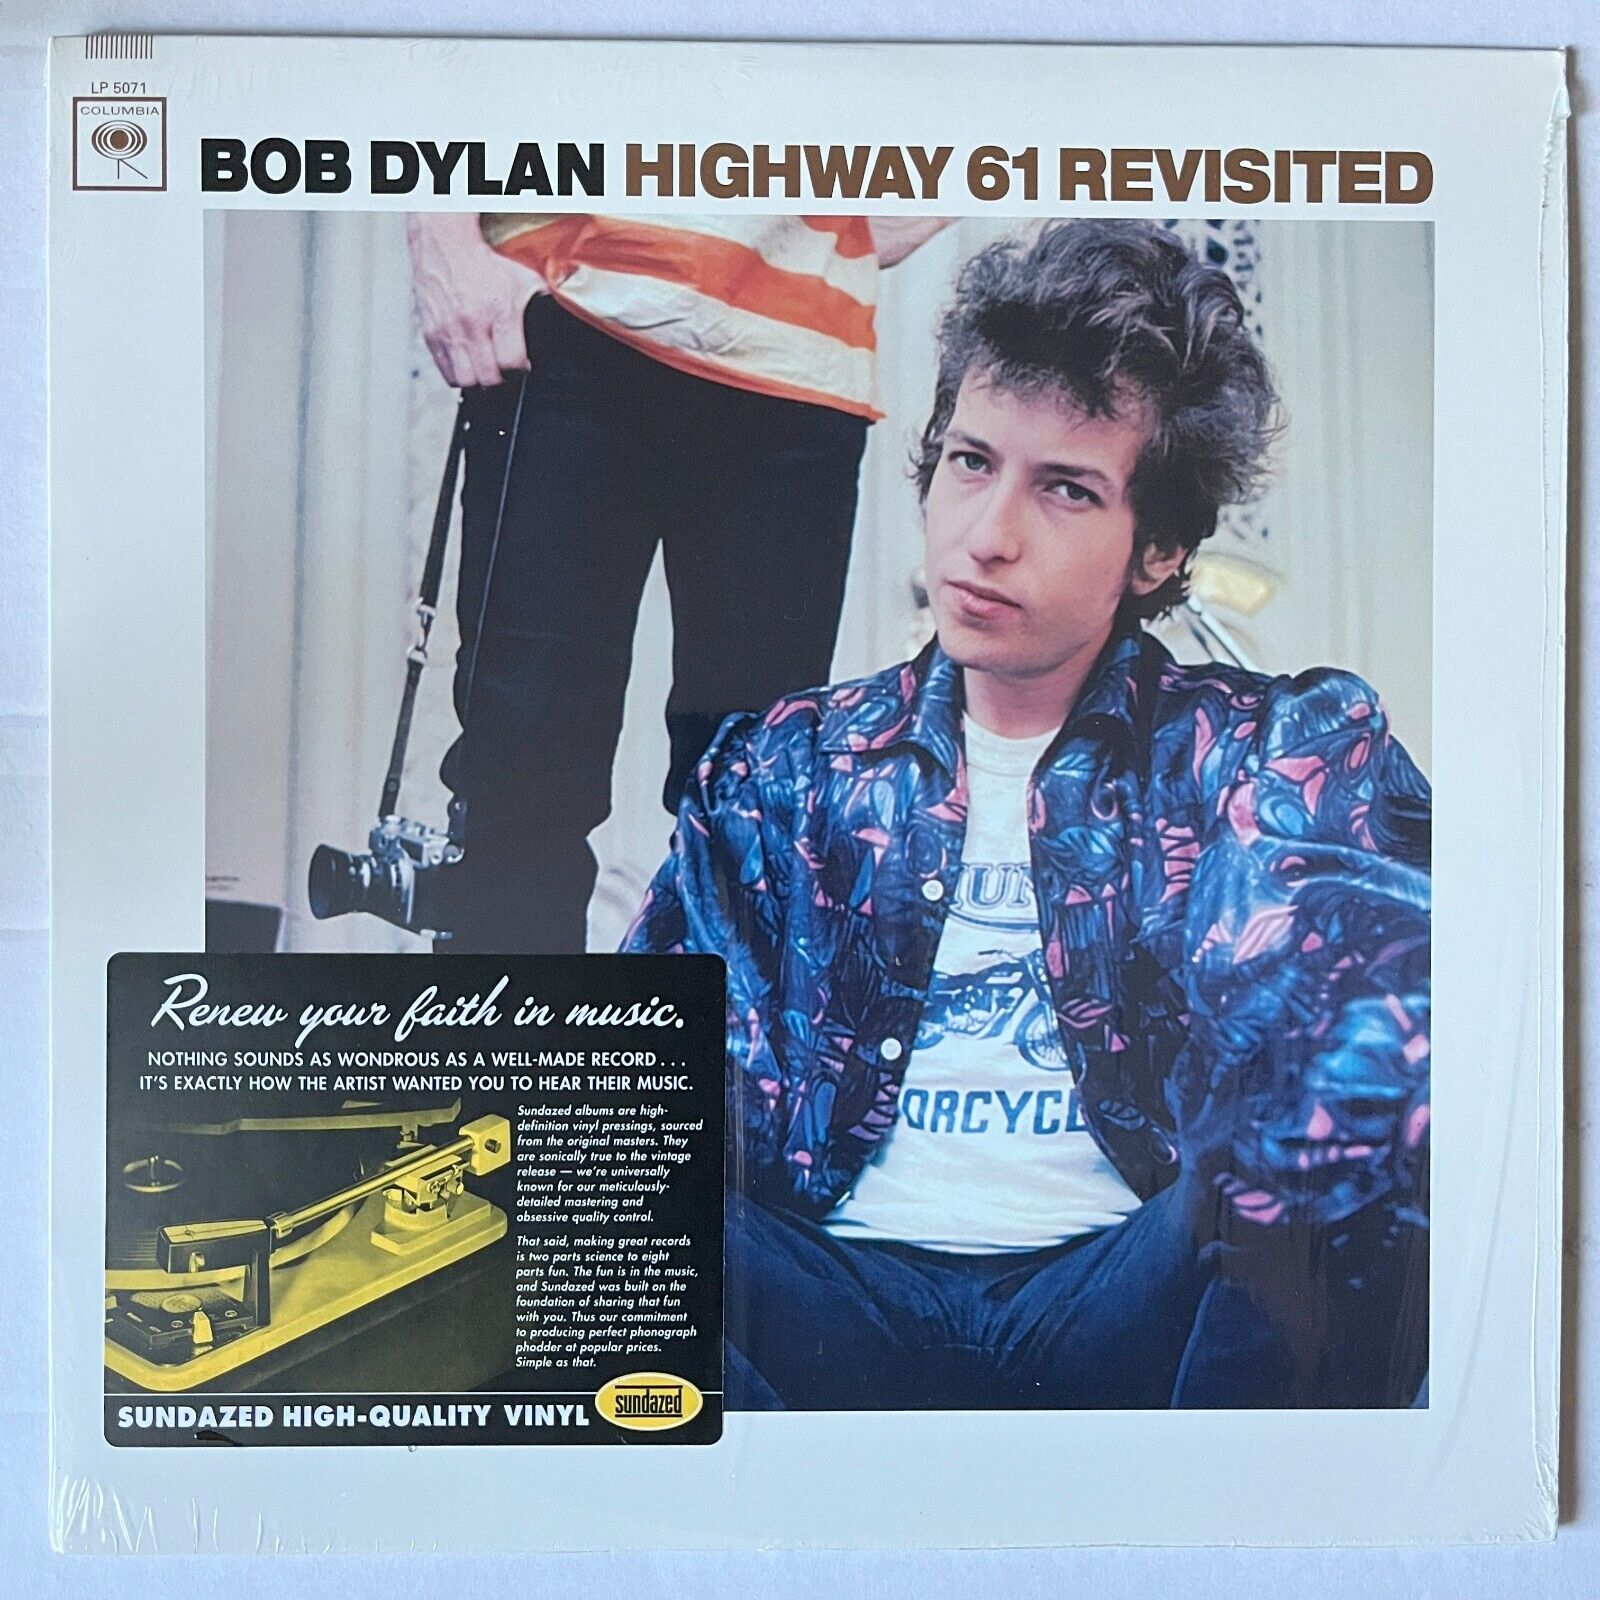 Bob Dylan: Highway 61 Revisited (180g, MONO, 2012, Kevin Gray master, NM)